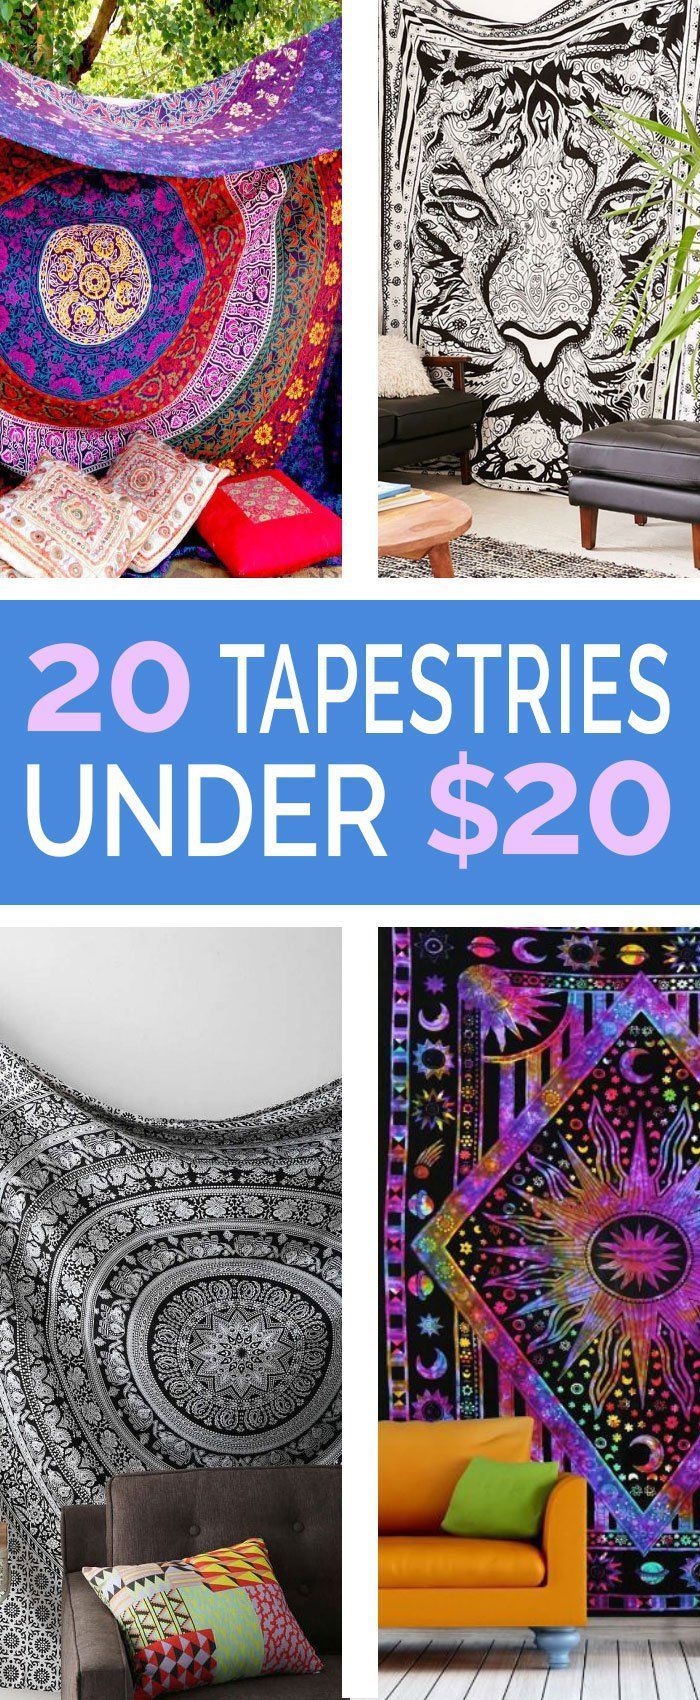 20 Tapestries Under $20 That Will Make Any Room Complete – Love these cheap tapestries for your college dorm room